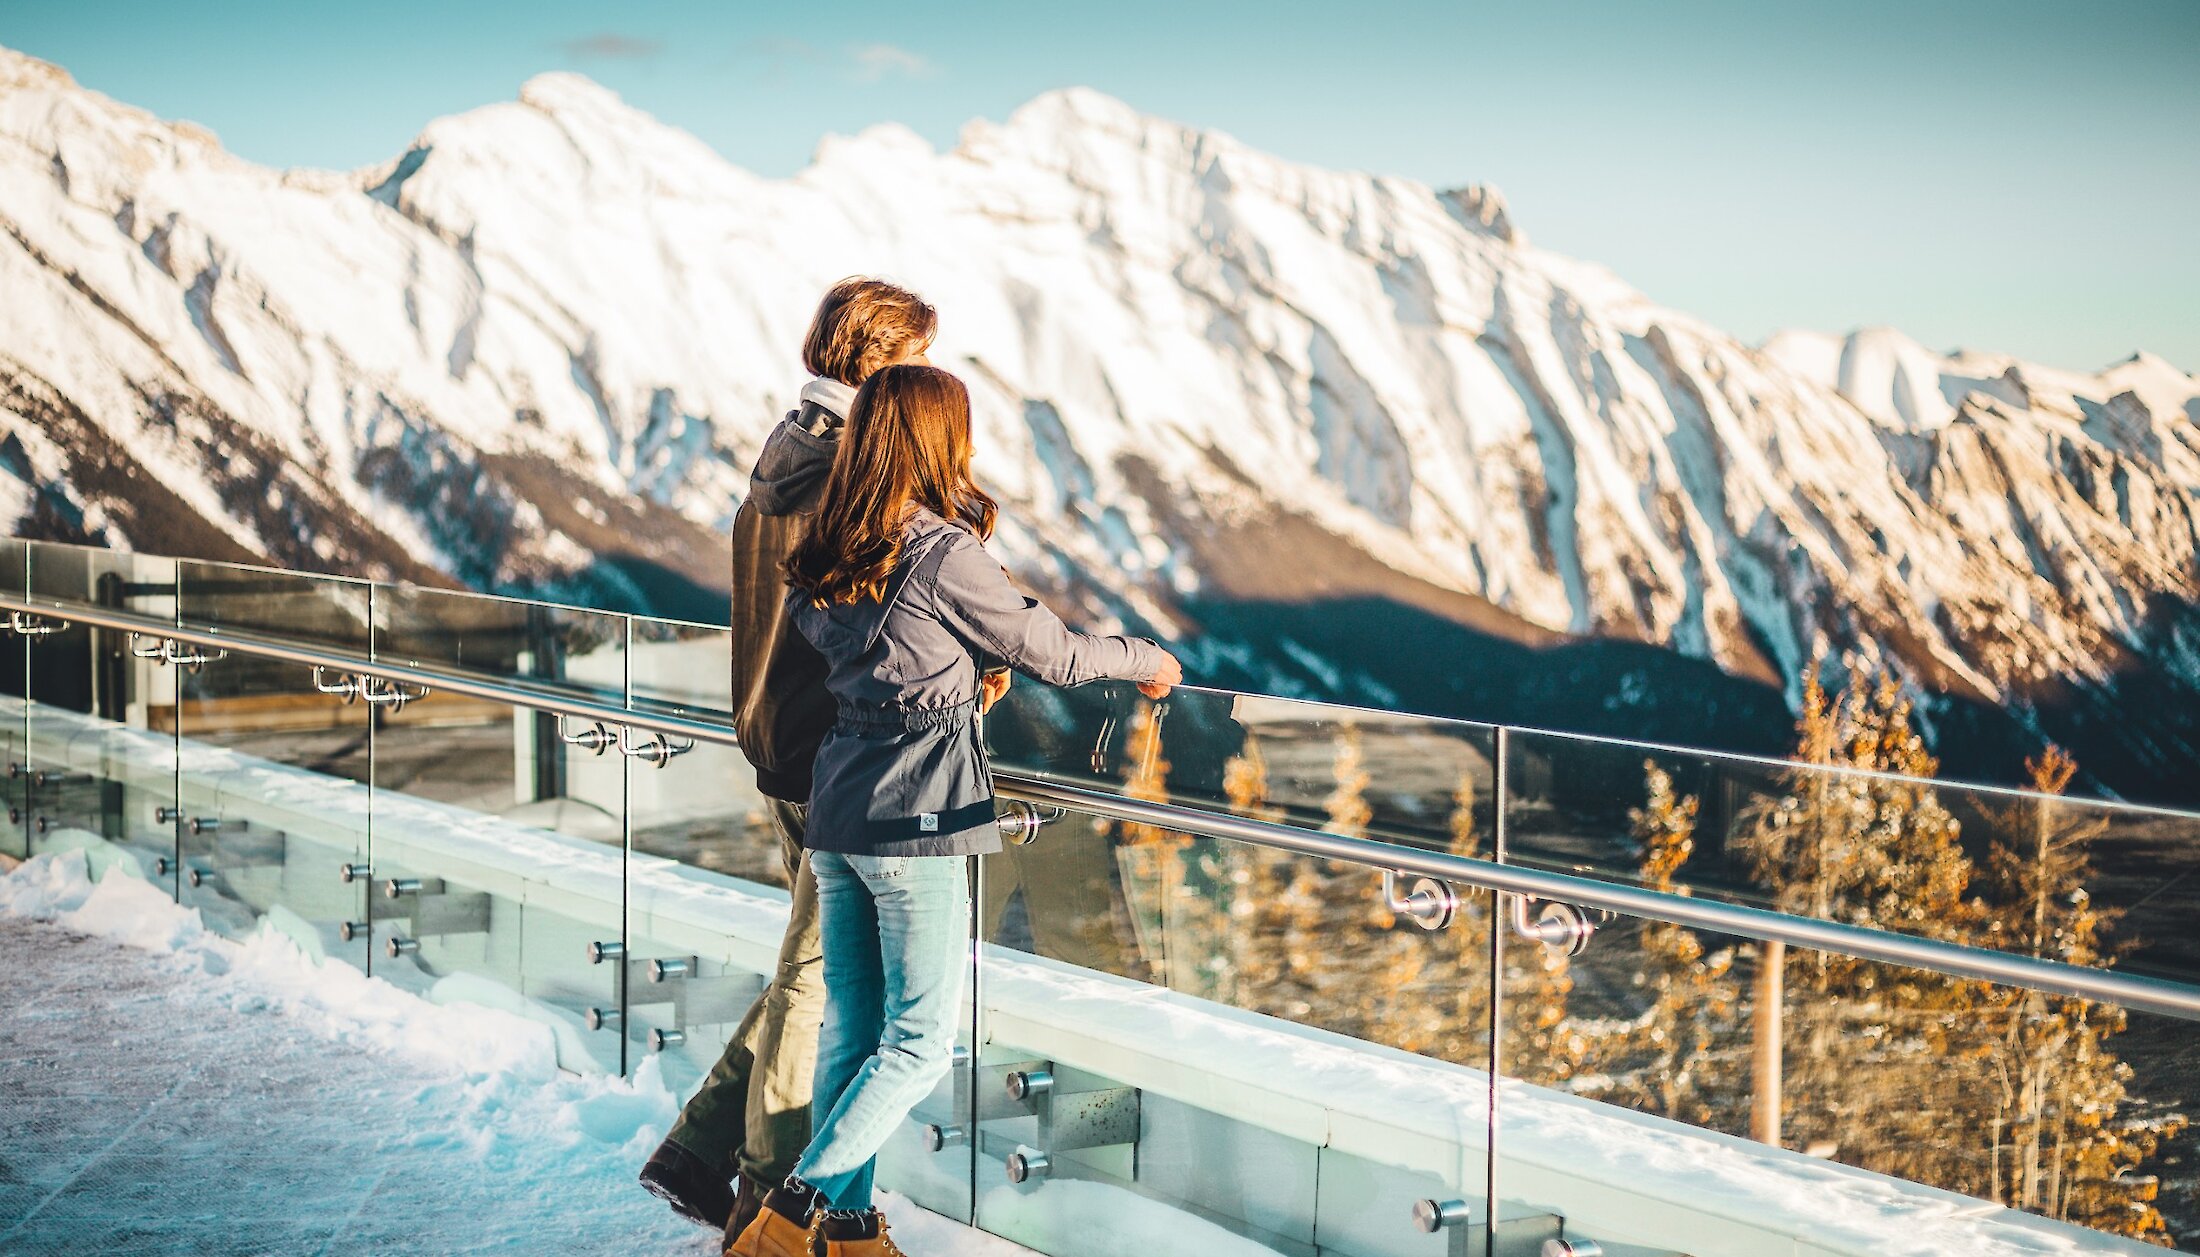 Couple admiring the views from the top of the Banff Gondola in winter